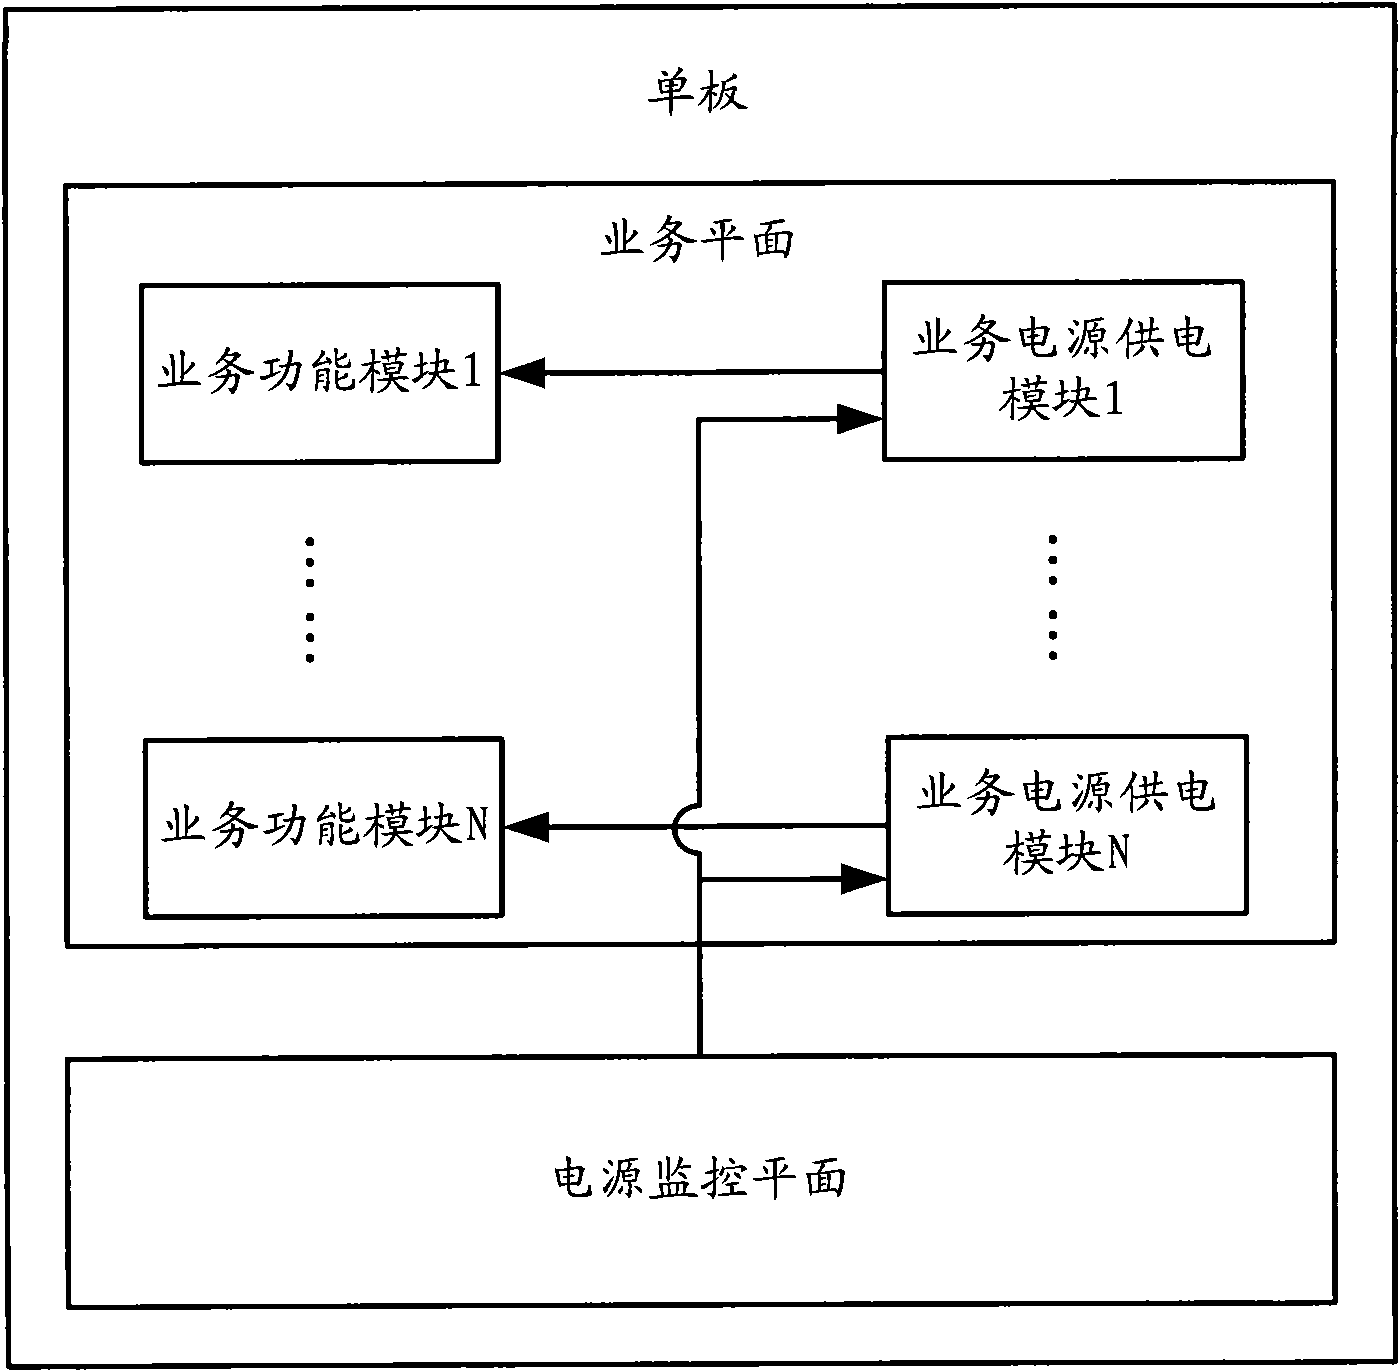 Single board and method for power monitoring in board